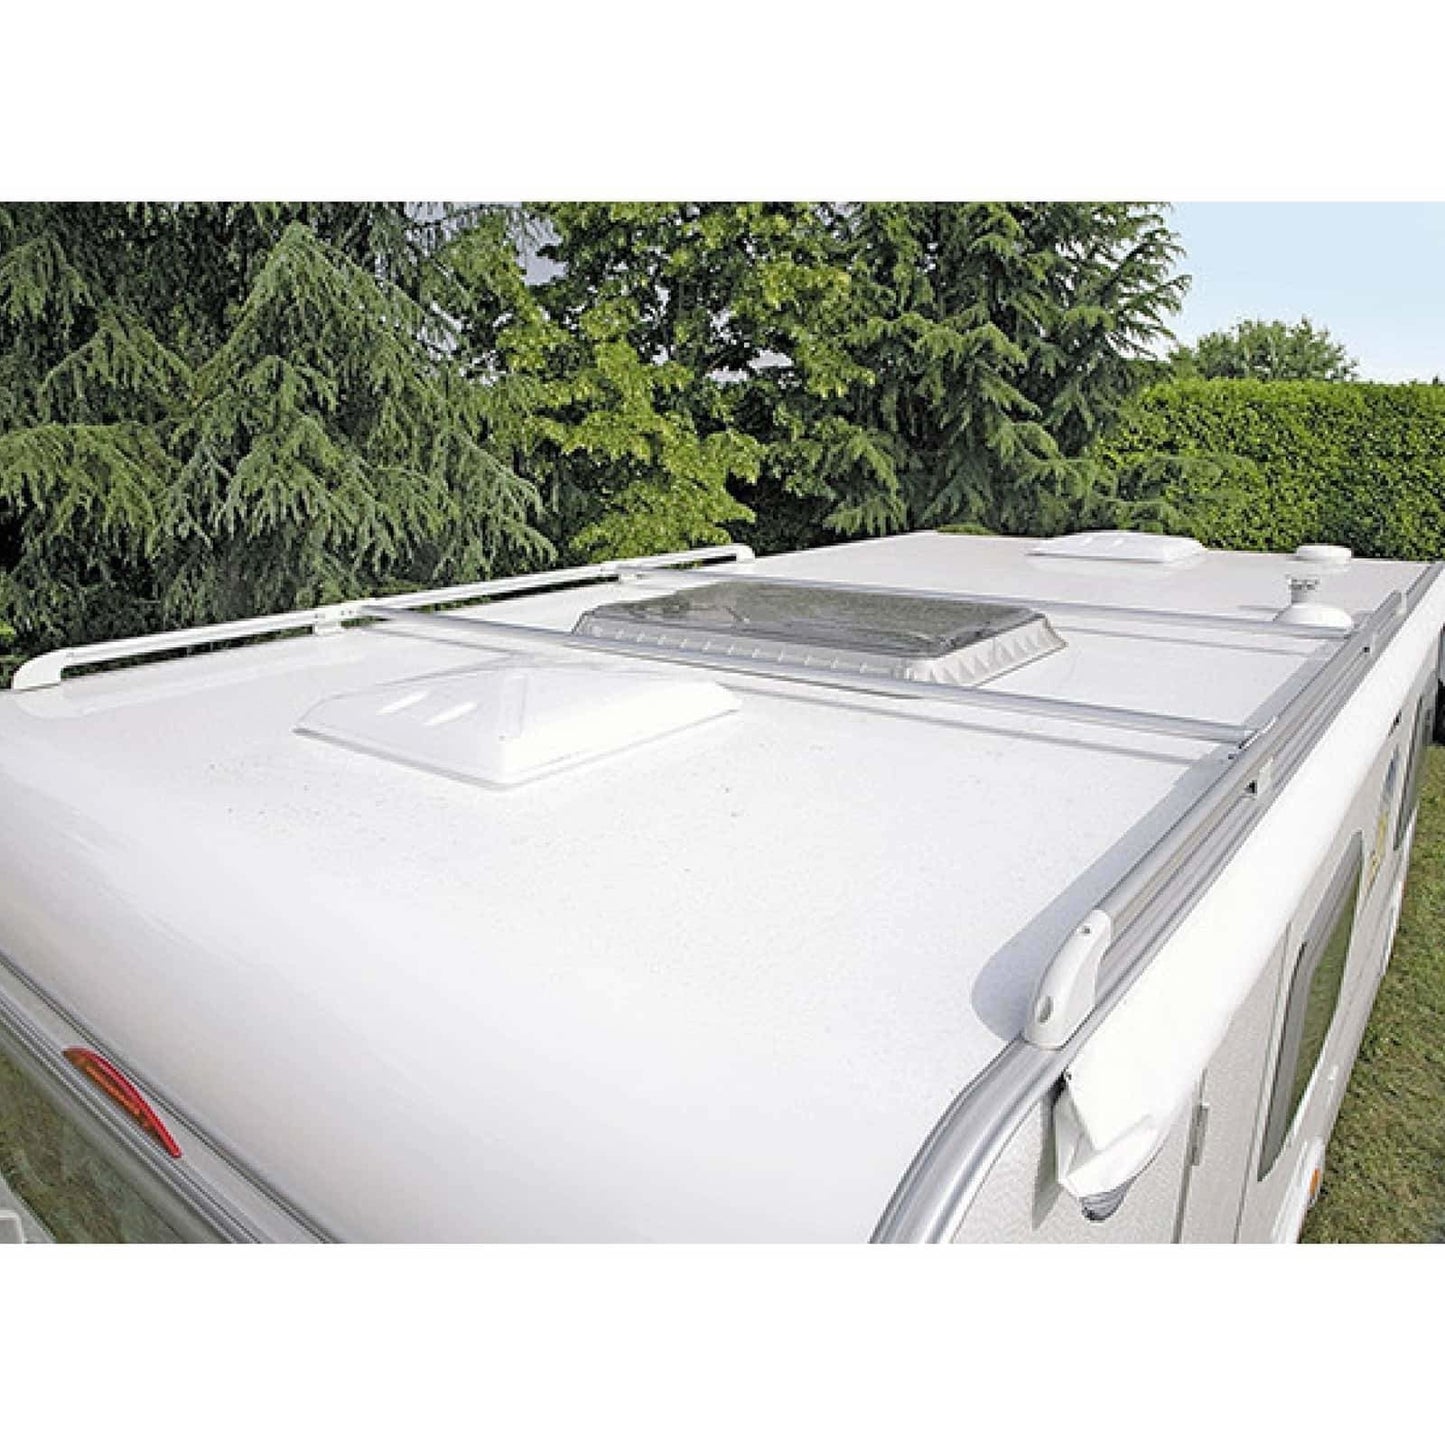 Fiamma Luggage Roof Rail made by Fiamma. A Accessories sold by Quality Caravan Awnings